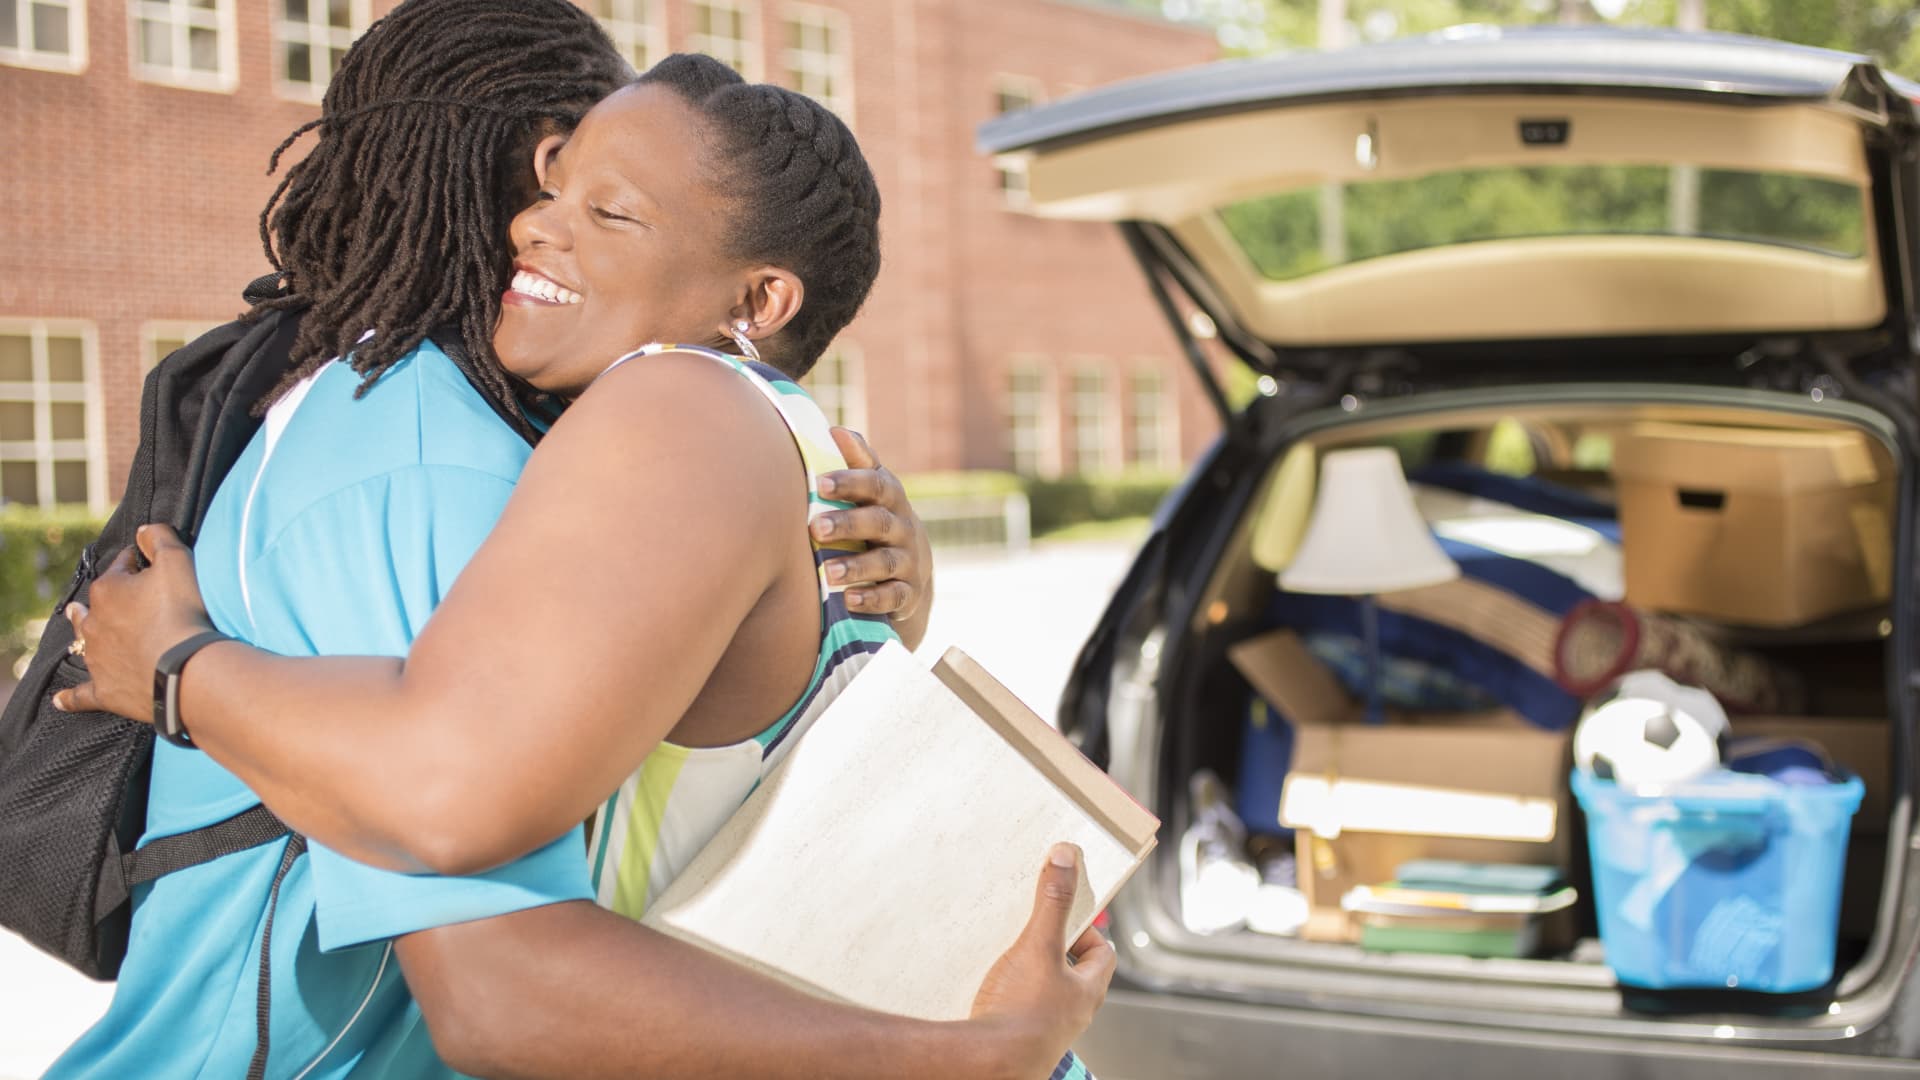 These lesser-known tax tips may help college-bound families